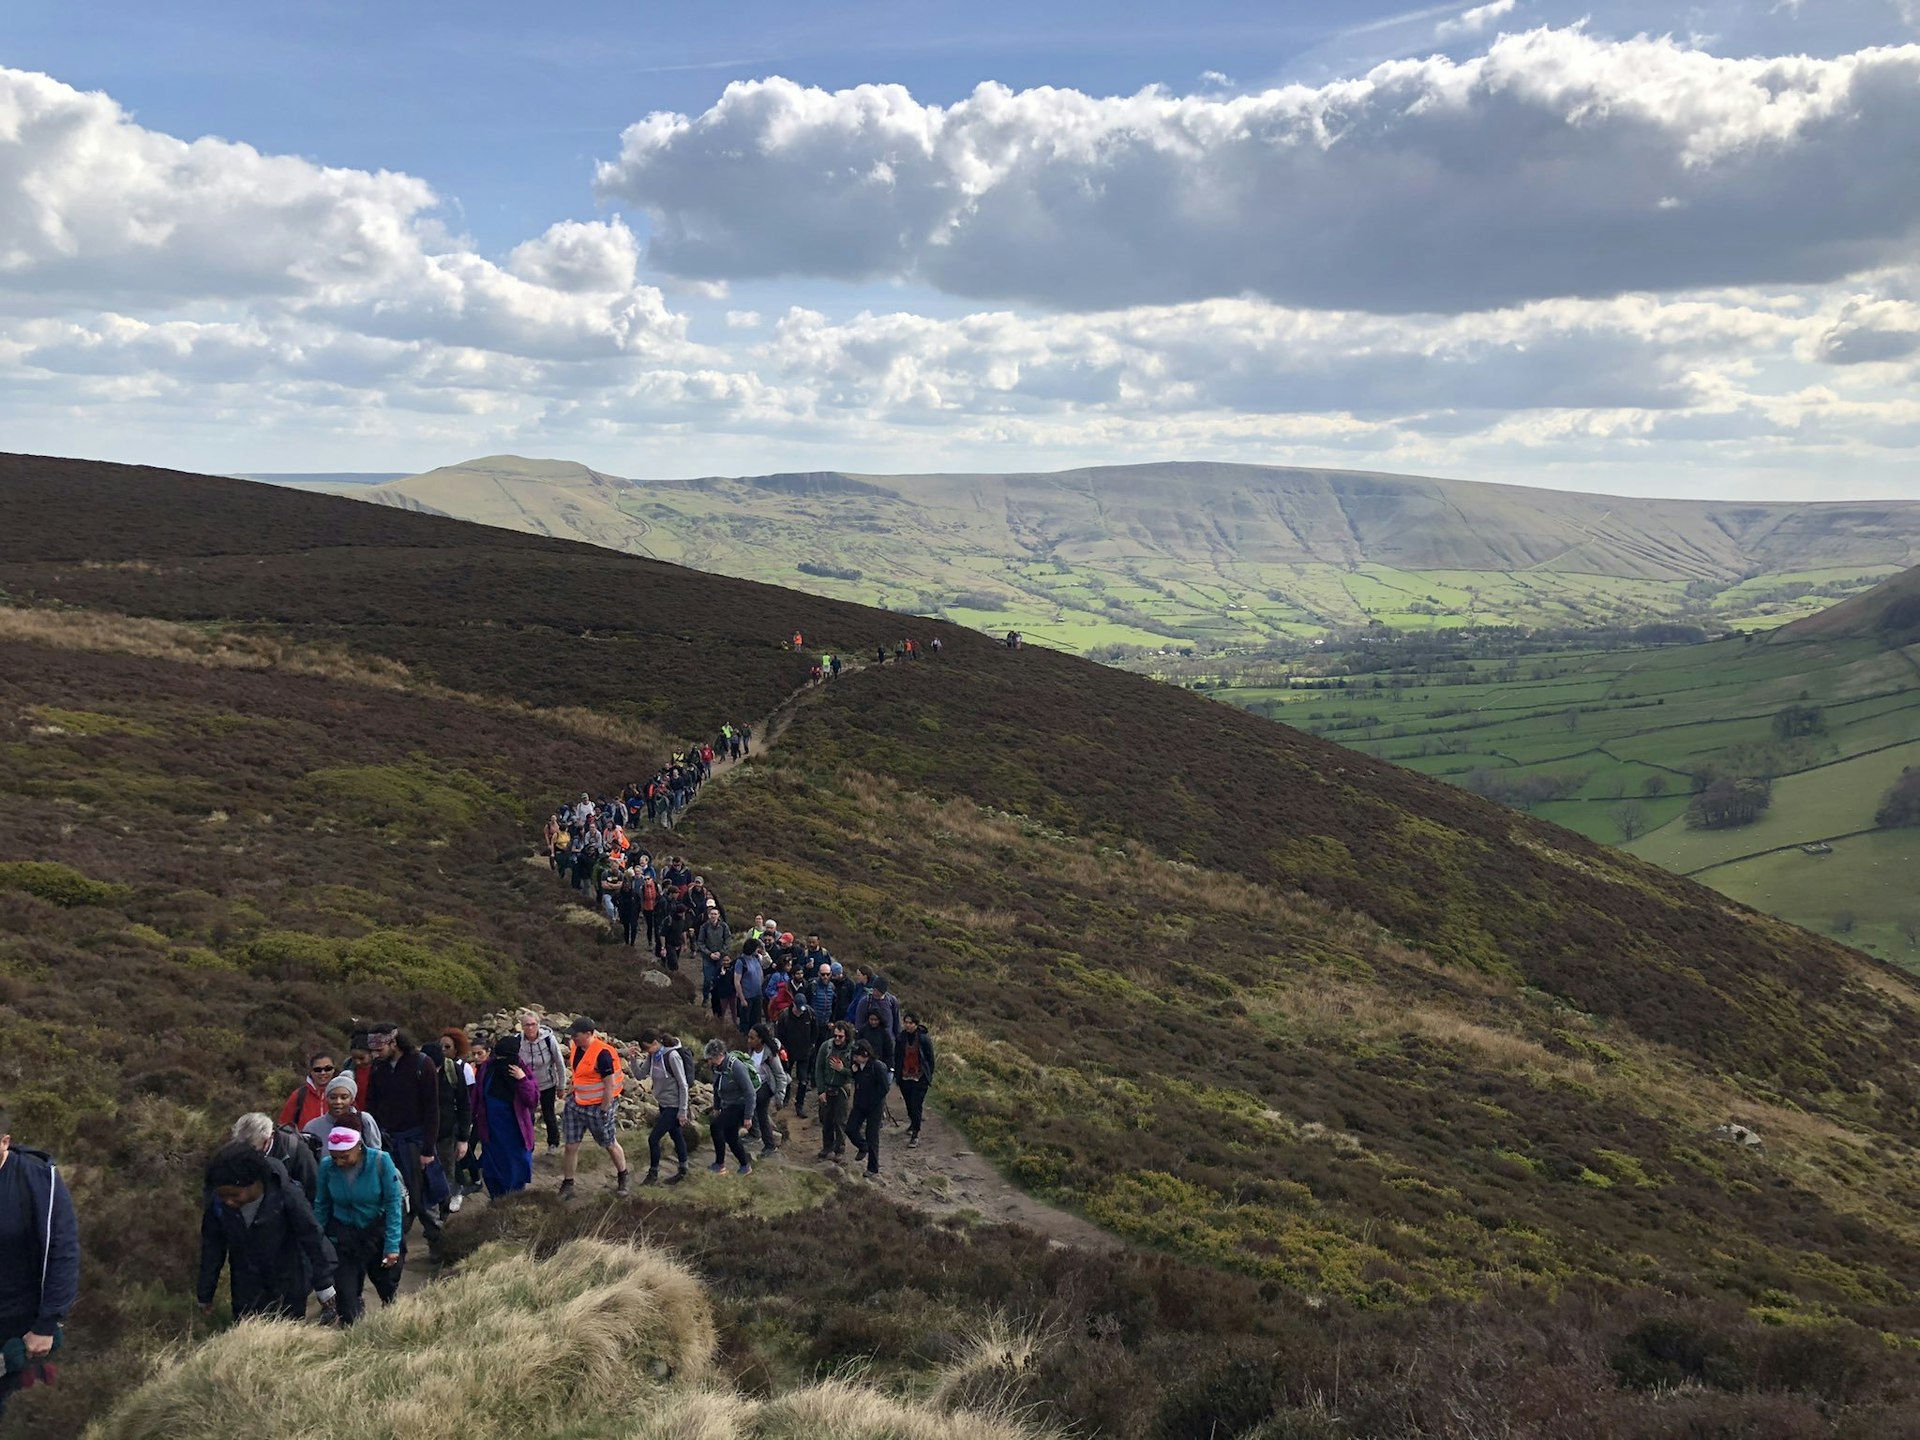 Kinder in colour: the hikers reclaiming the countryside